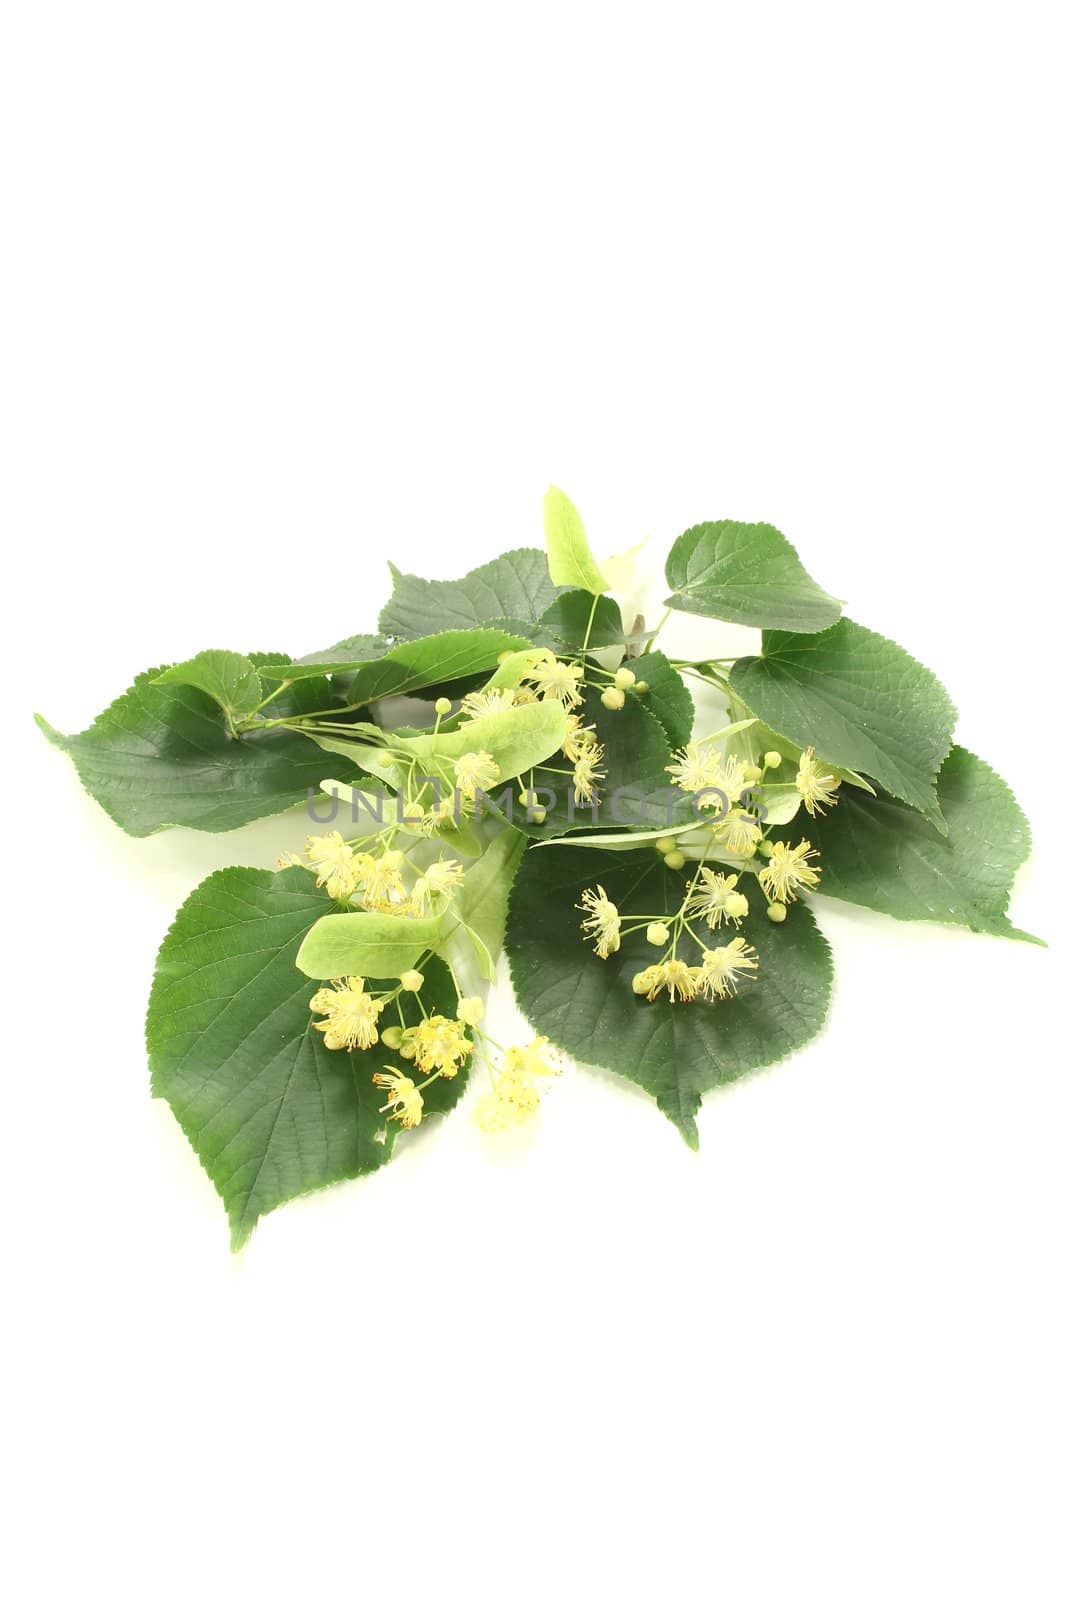 fresh yellow linden blossoms by discovery